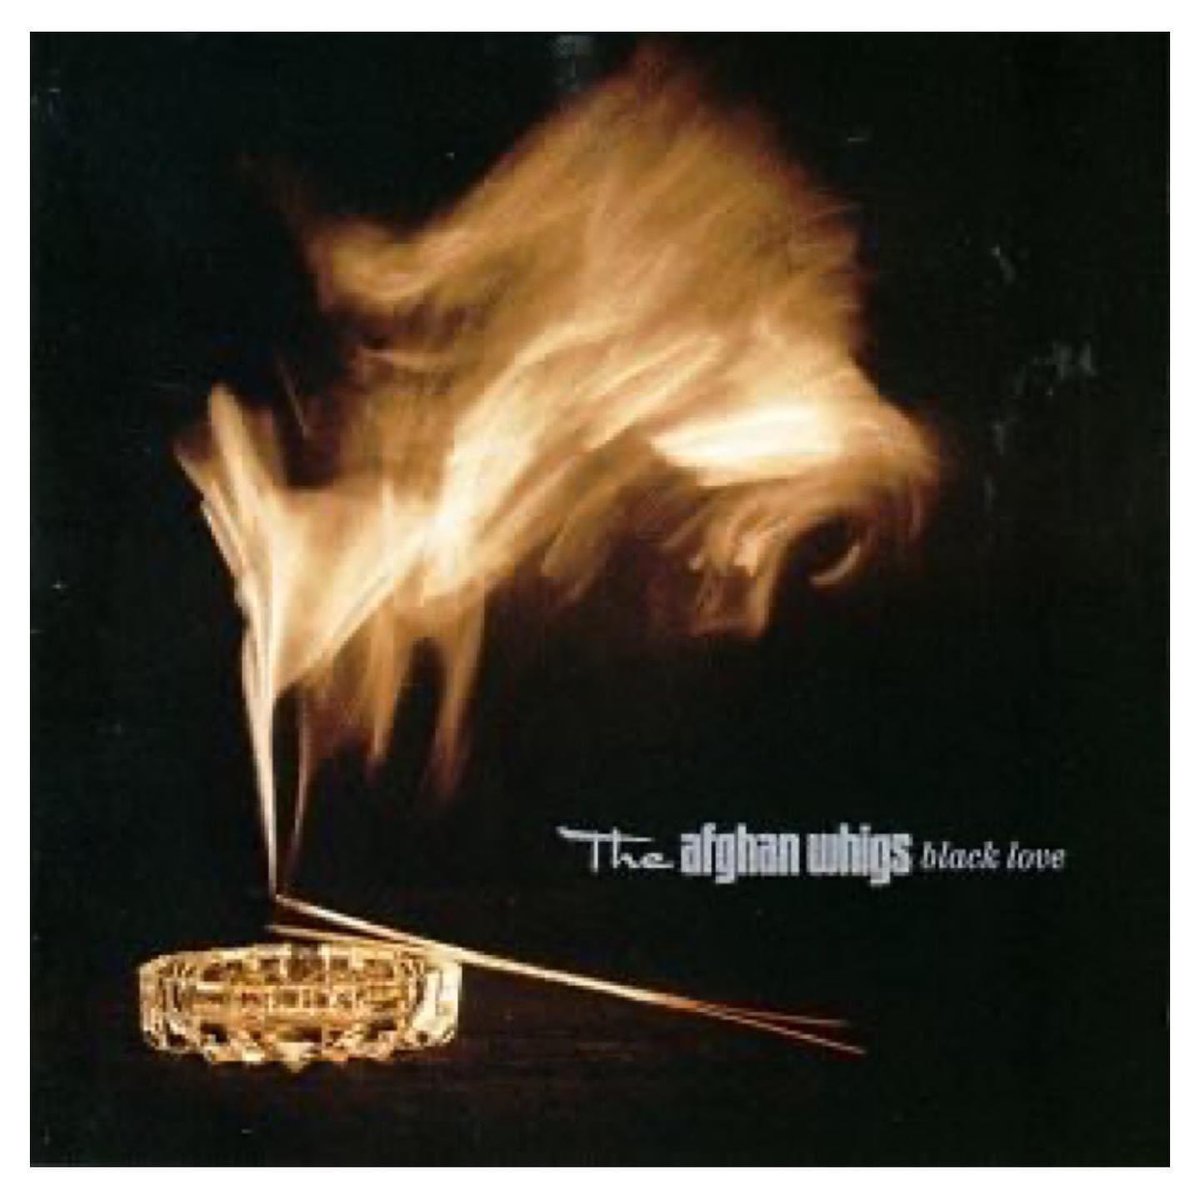 Not many bands make a perfect album, where every single song crushes you. @theafghanwhigs have two. 26 years ago today their 2nd perfect album was released.